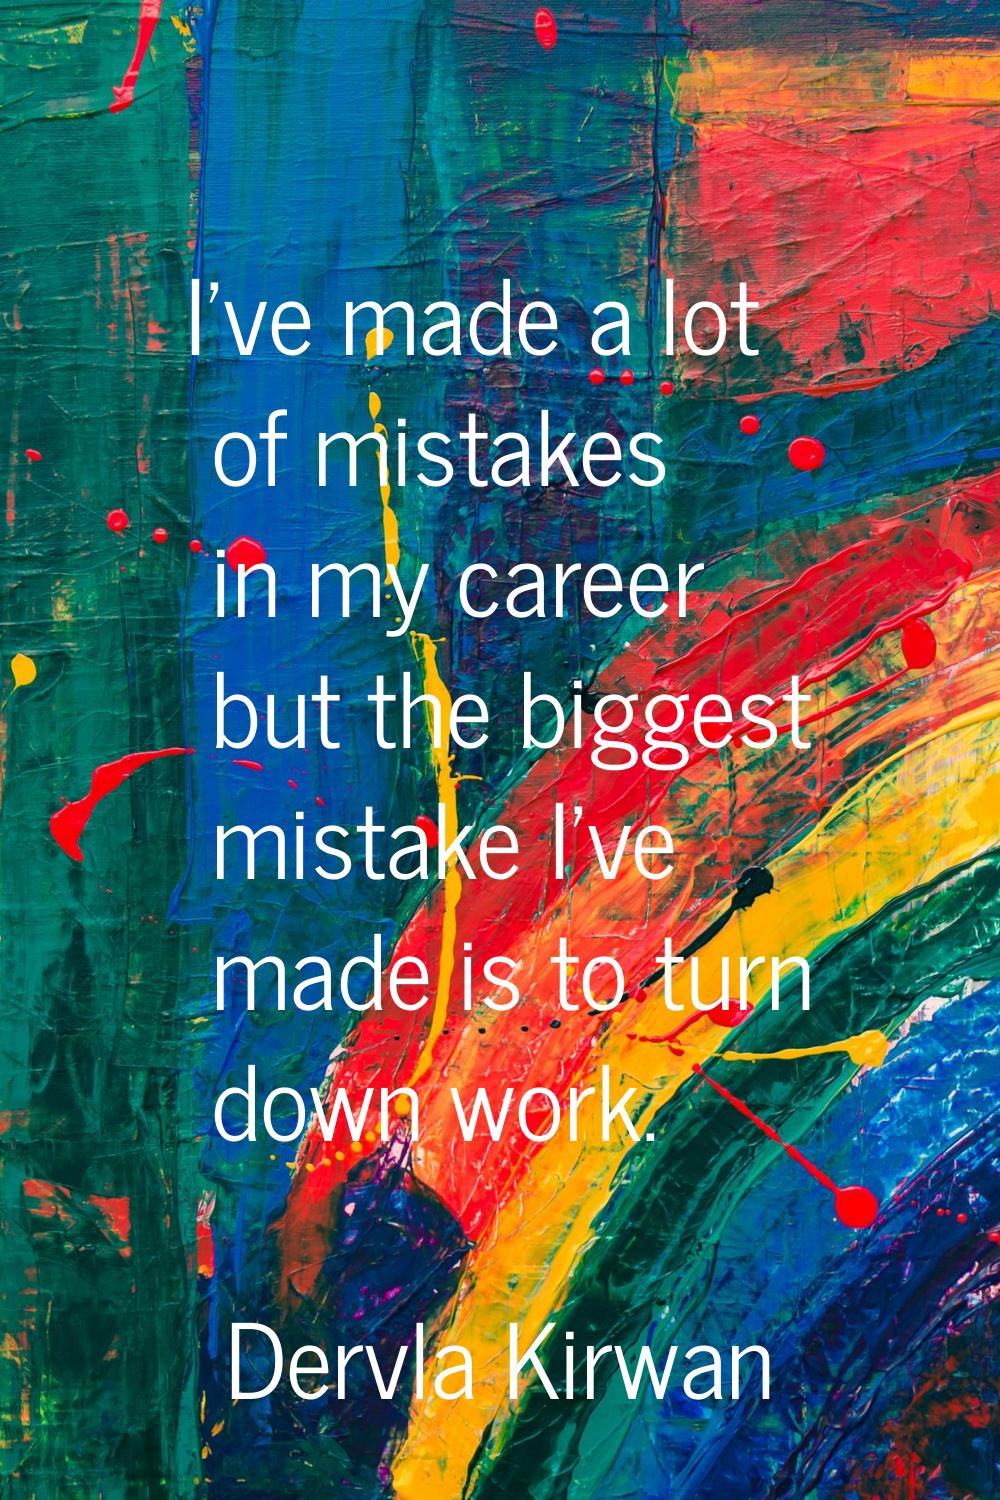 I've made a lot of mistakes in my career but the biggest mistake I've made is to turn down work.